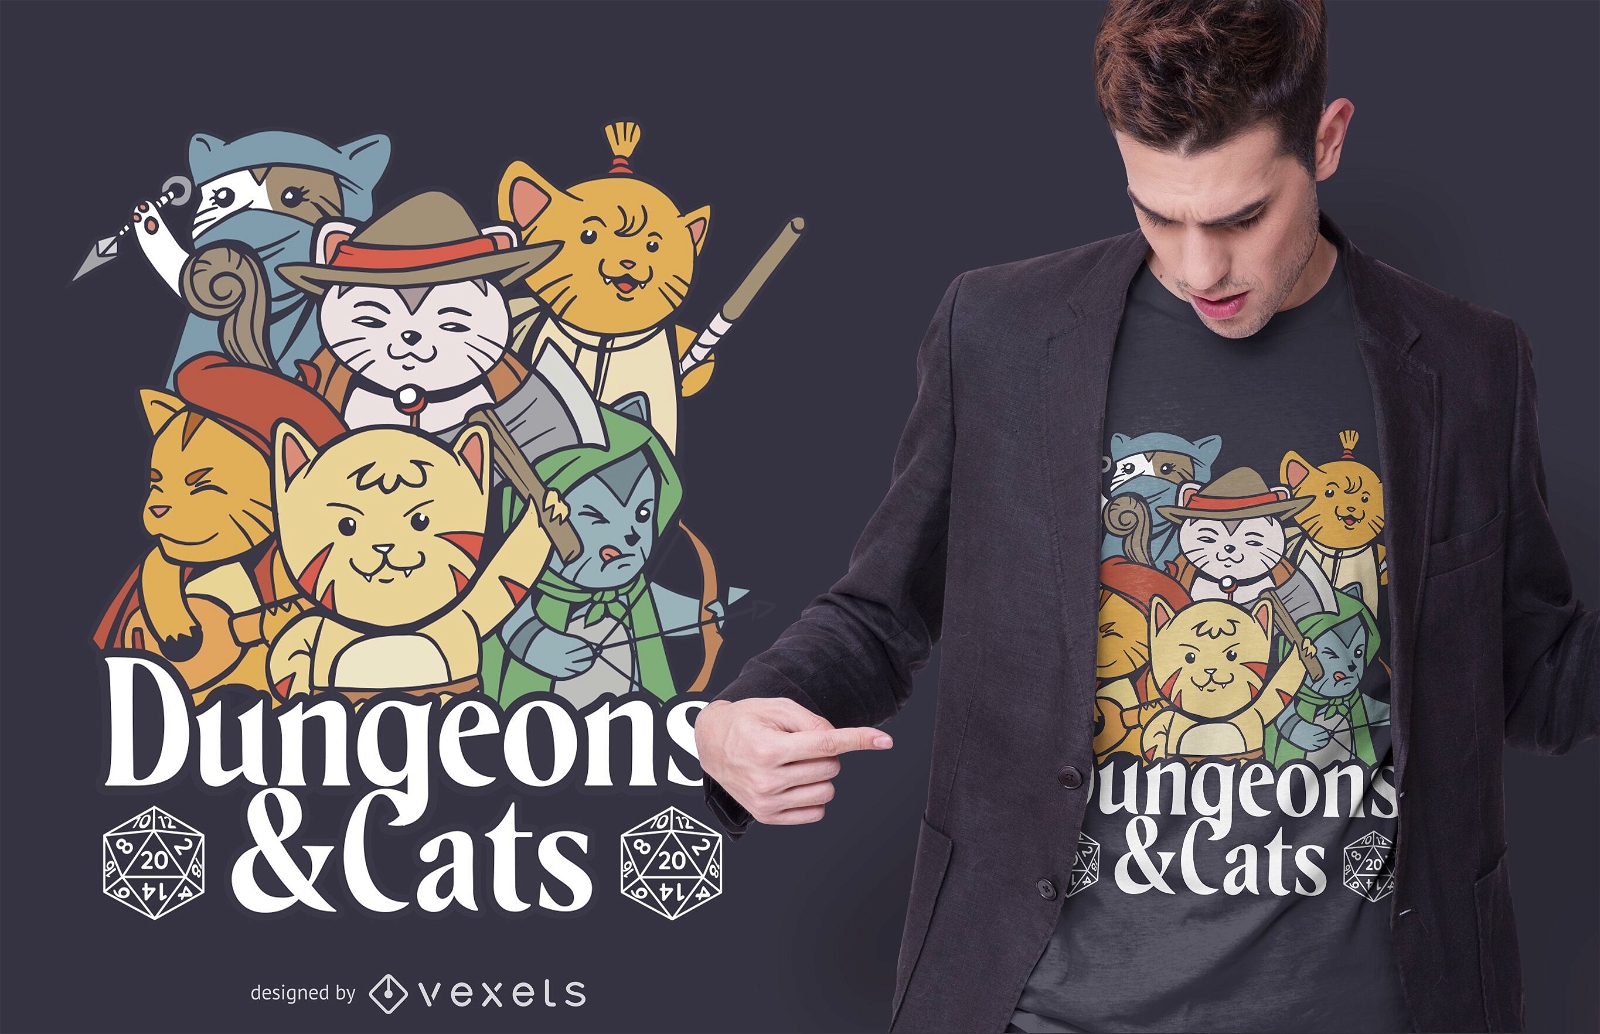 Dungeons and cats t-shirt design